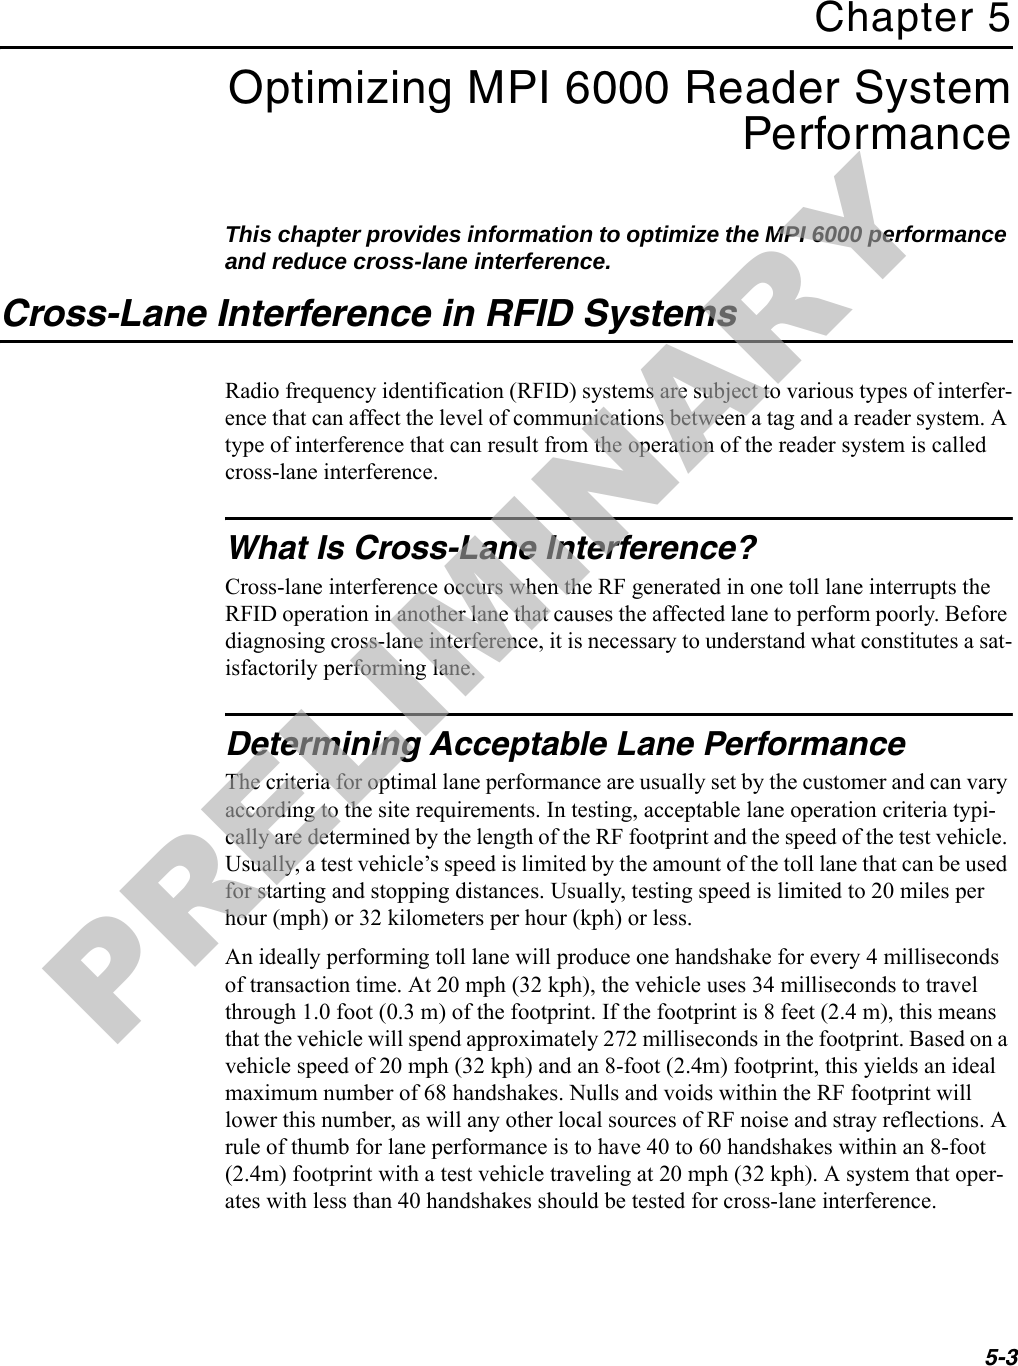 5-3Chapter 5Optimizing MPI 6000 Reader System PerformanceThis chapter provides information to optimize the MPI 6000 performance and reduce cross-lane interference.Cross-Lane Interference in RFID SystemsRadio frequency identification (RFID) systems are subject to various types of interfer-ence that can affect the level of communications between a tag and a reader system. A type of interference that can result from the operation of the reader system is called cross-lane interference.What Is Cross-Lane Interference?Cross-lane interference occurs when the RF generated in one toll lane interrupts the RFID operation in another lane that causes the affected lane to perform poorly. Before diagnosing cross-lane interference, it is necessary to understand what constitutes a sat-isfactorily performing lane.Determining Acceptable Lane PerformanceThe criteria for optimal lane performance are usually set by the customer and can vary according to the site requirements. In testing, acceptable lane operation criteria typi-cally are determined by the length of the RF footprint and the speed of the test vehicle. Usually, a test vehicle’s speed is limited by the amount of the toll lane that can be used for starting and stopping distances. Usually, testing speed is limited to 20 miles per hour (mph) or 32 kilometers per hour (kph) or less.An ideally performing toll lane will produce one handshake for every 4 milliseconds of transaction time. At 20 mph (32 kph), the vehicle uses 34 milliseconds to travel through 1.0 foot (0.3 m) of the footprint. If the footprint is 8 feet (2.4 m), this means that the vehicle will spend approximately 272 milliseconds in the footprint. Based on a vehicle speed of 20 mph (32 kph) and an 8-foot (2.4m) footprint, this yields an ideal maximum number of 68 handshakes. Nulls and voids within the RF footprint will lower this number, as will any other local sources of RF noise and stray reflections. A rule of thumb for lane performance is to have 40 to 60 handshakes within an 8-foot (2.4m) footprint with a test vehicle traveling at 20 mph (32 kph). A system that oper-ates with less than 40 handshakes should be tested for cross-lane interference.PRELIMINARY